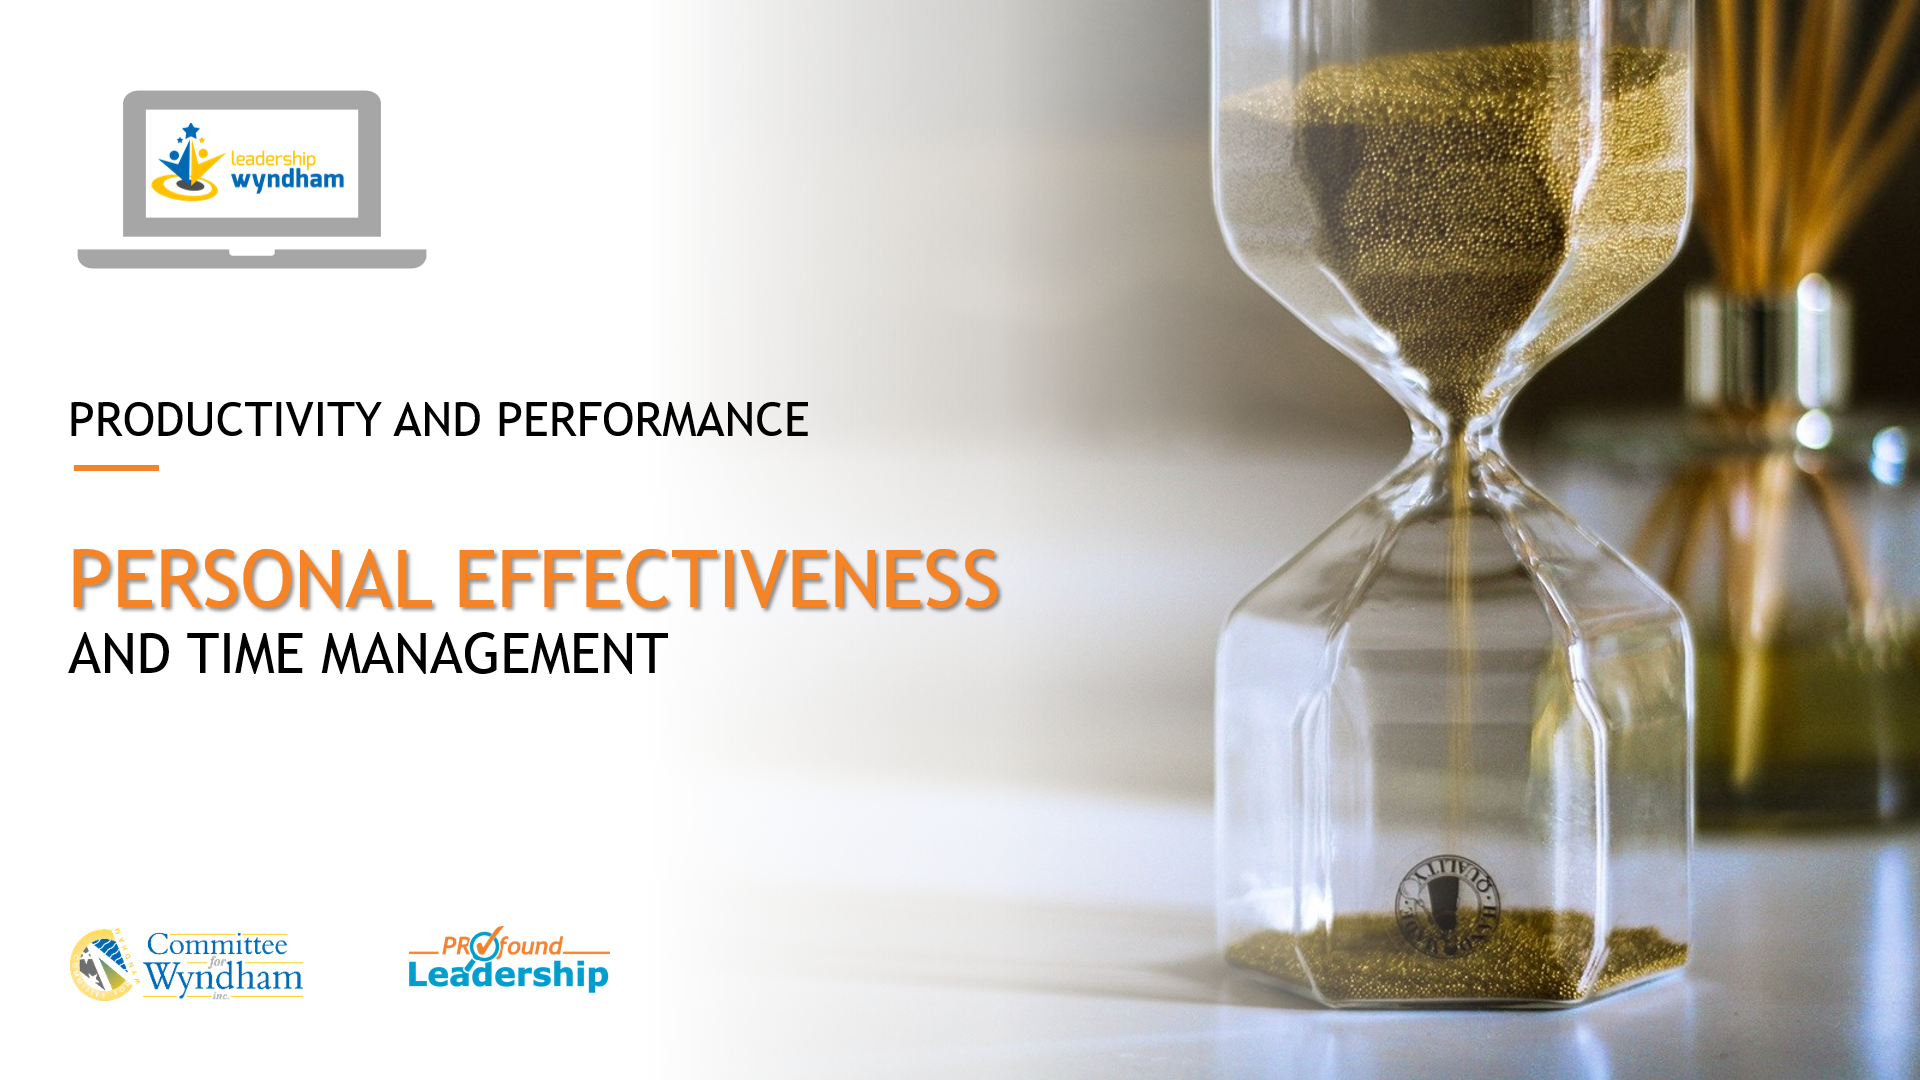 Online session - Leadership Skills - Professional Development - Productivity and performance - Personal Effectiveness - Committee for Wyndham - Feature image